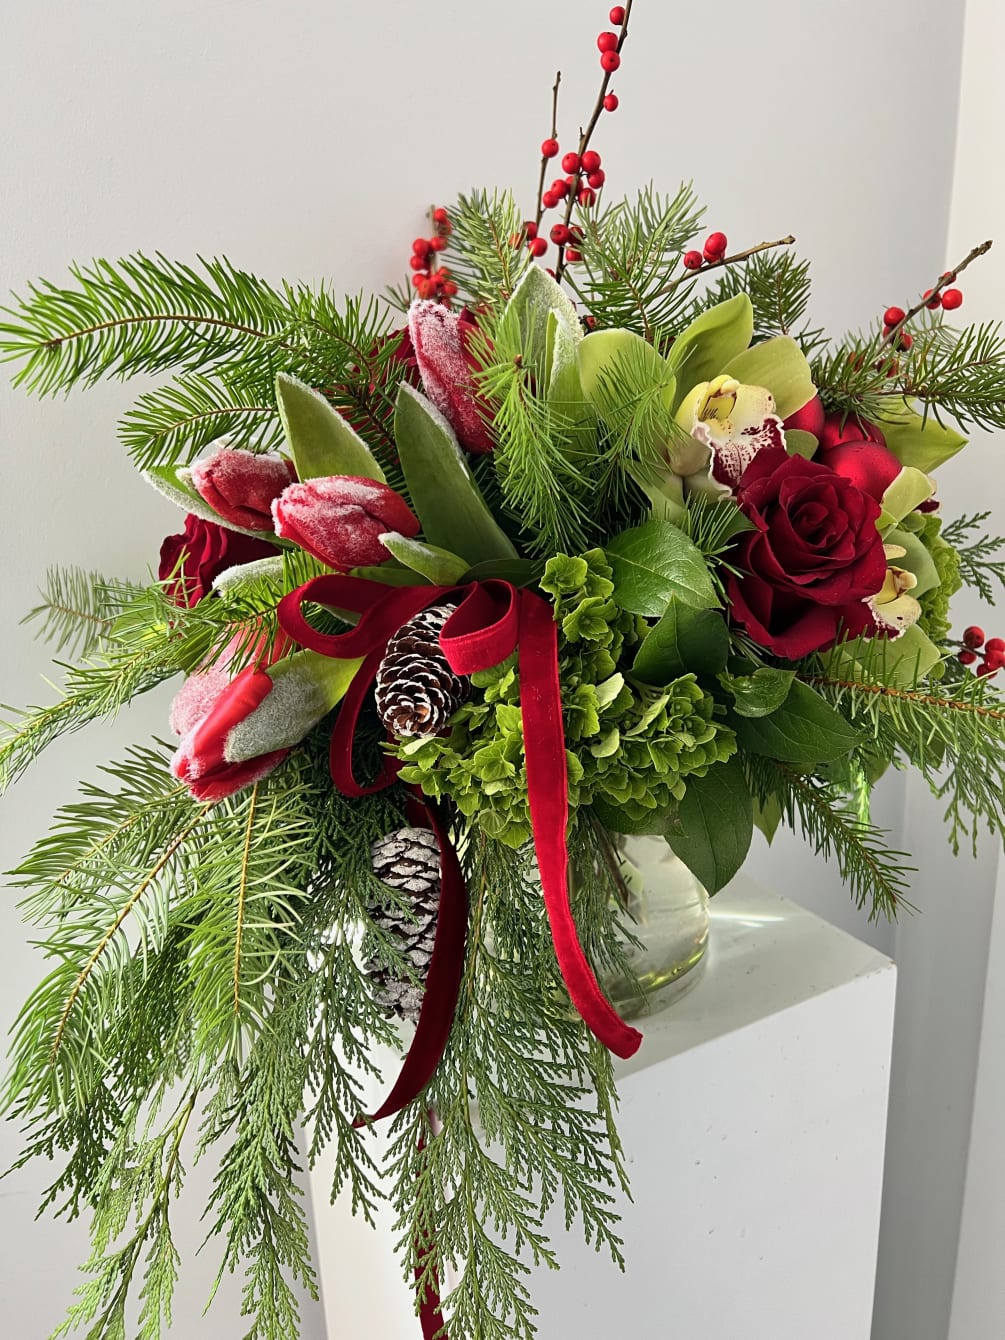 Beautiful arrangement filled with roses, orchids tulips, ilex berries Christmas greens